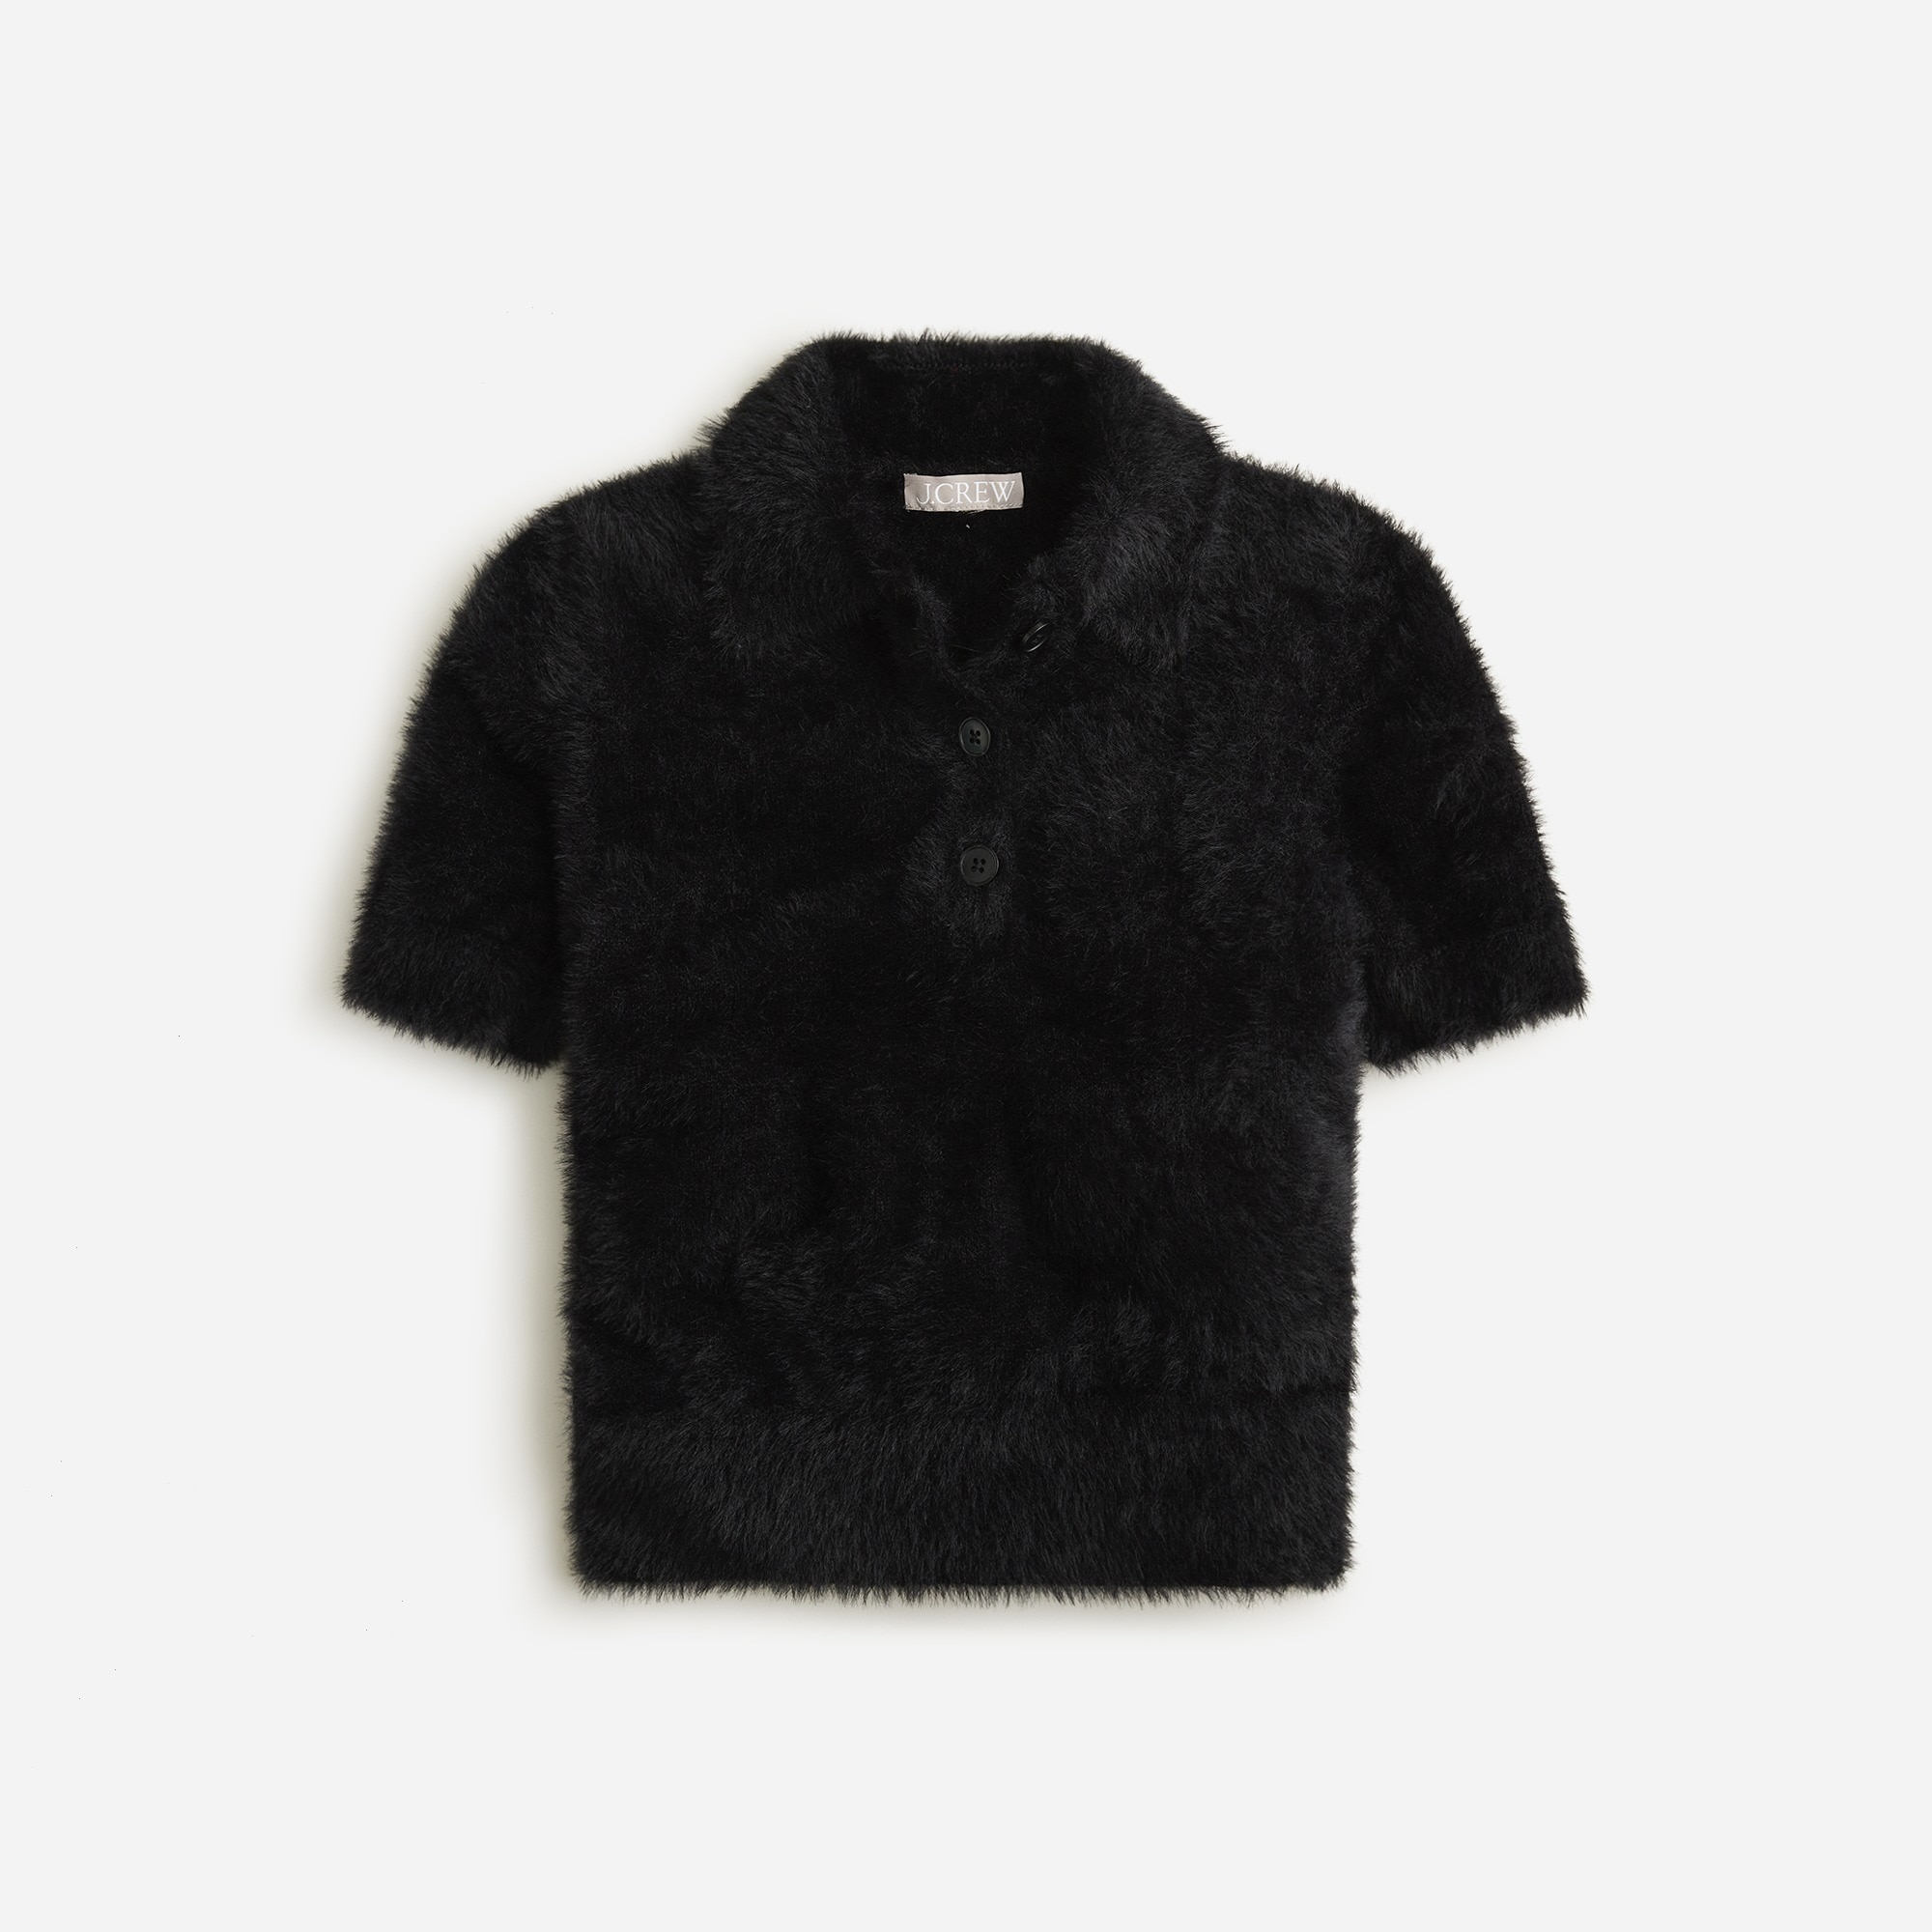  Short-sleeve sweater-polo in brushed yarn